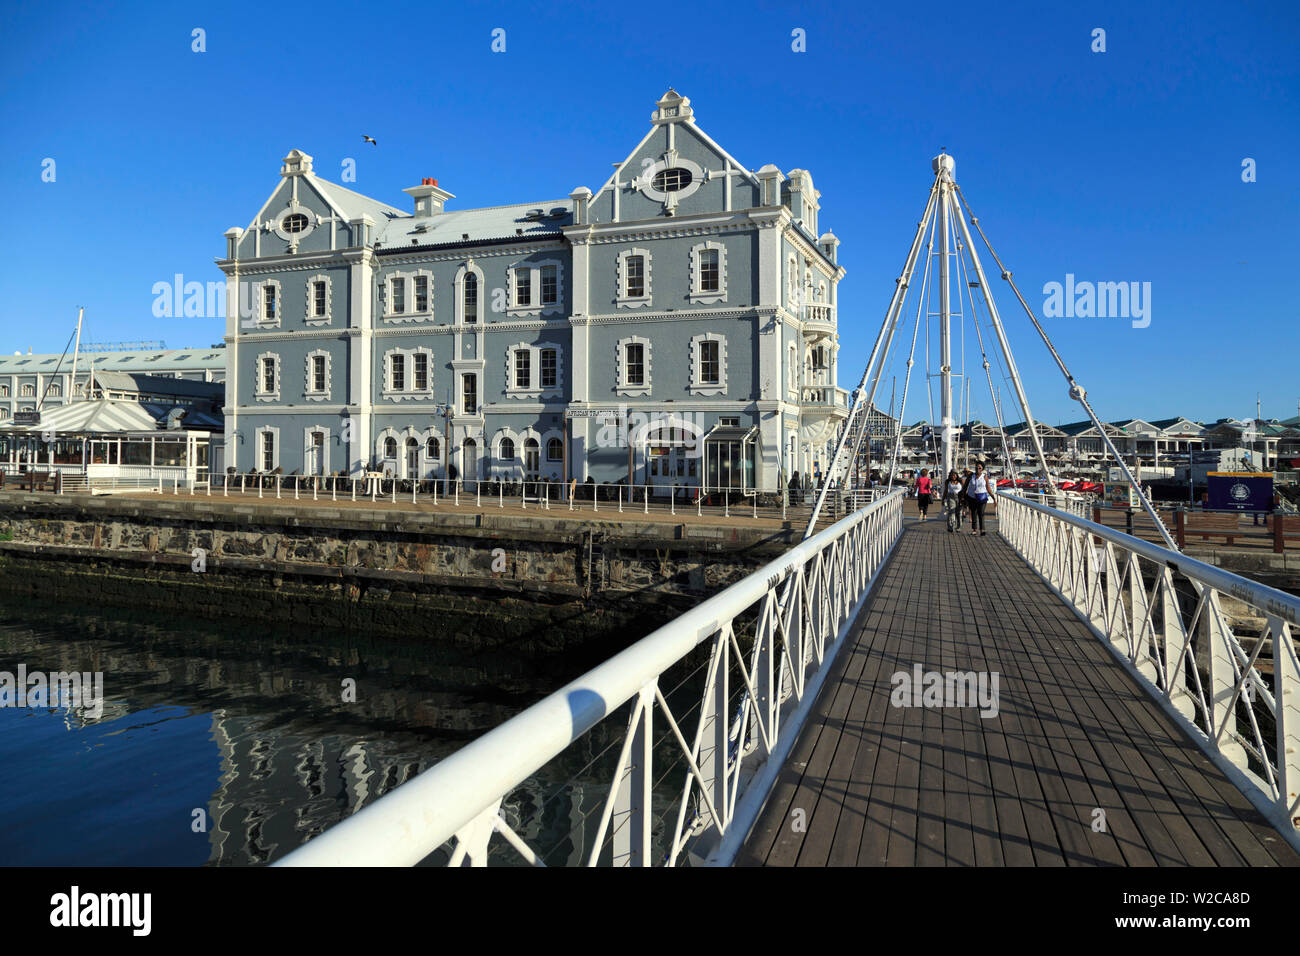 South Africa, Western Cape, Cape Town, V&A Waterfront, Historic African Trading Port Building Stock Photo